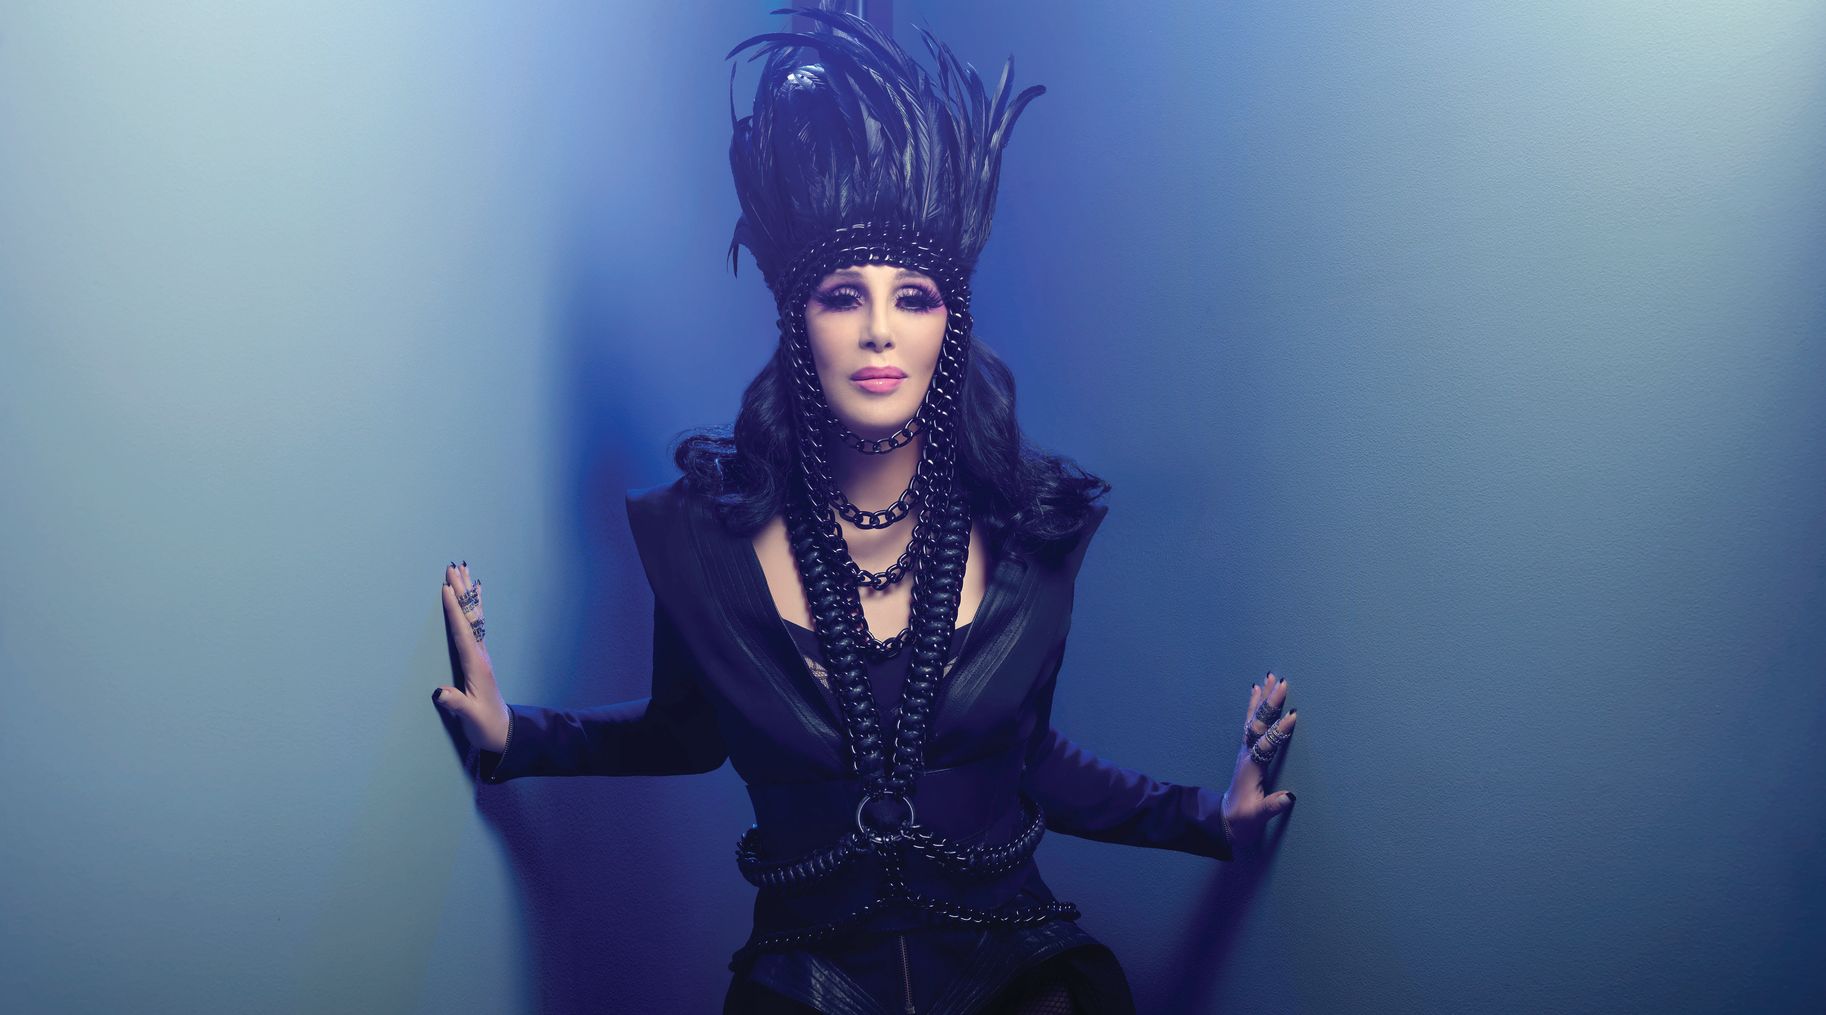 Win a VIP package for two to see Cher in Sydney and Melbourne